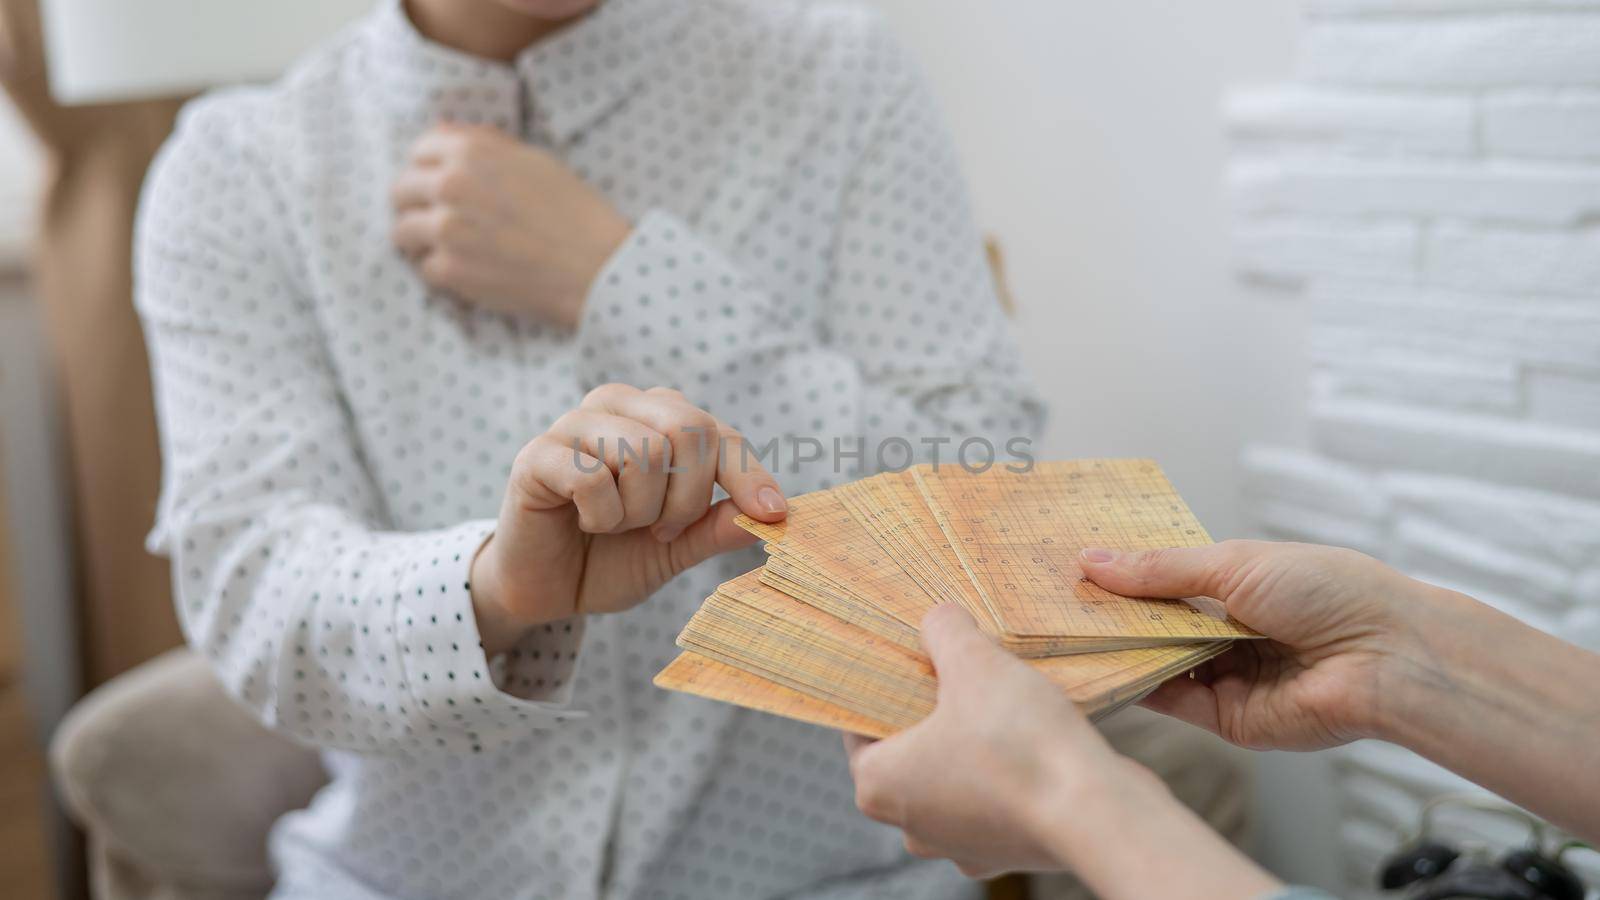 Psychologist uses metaphorical associative cards in a session with a patient. Close up